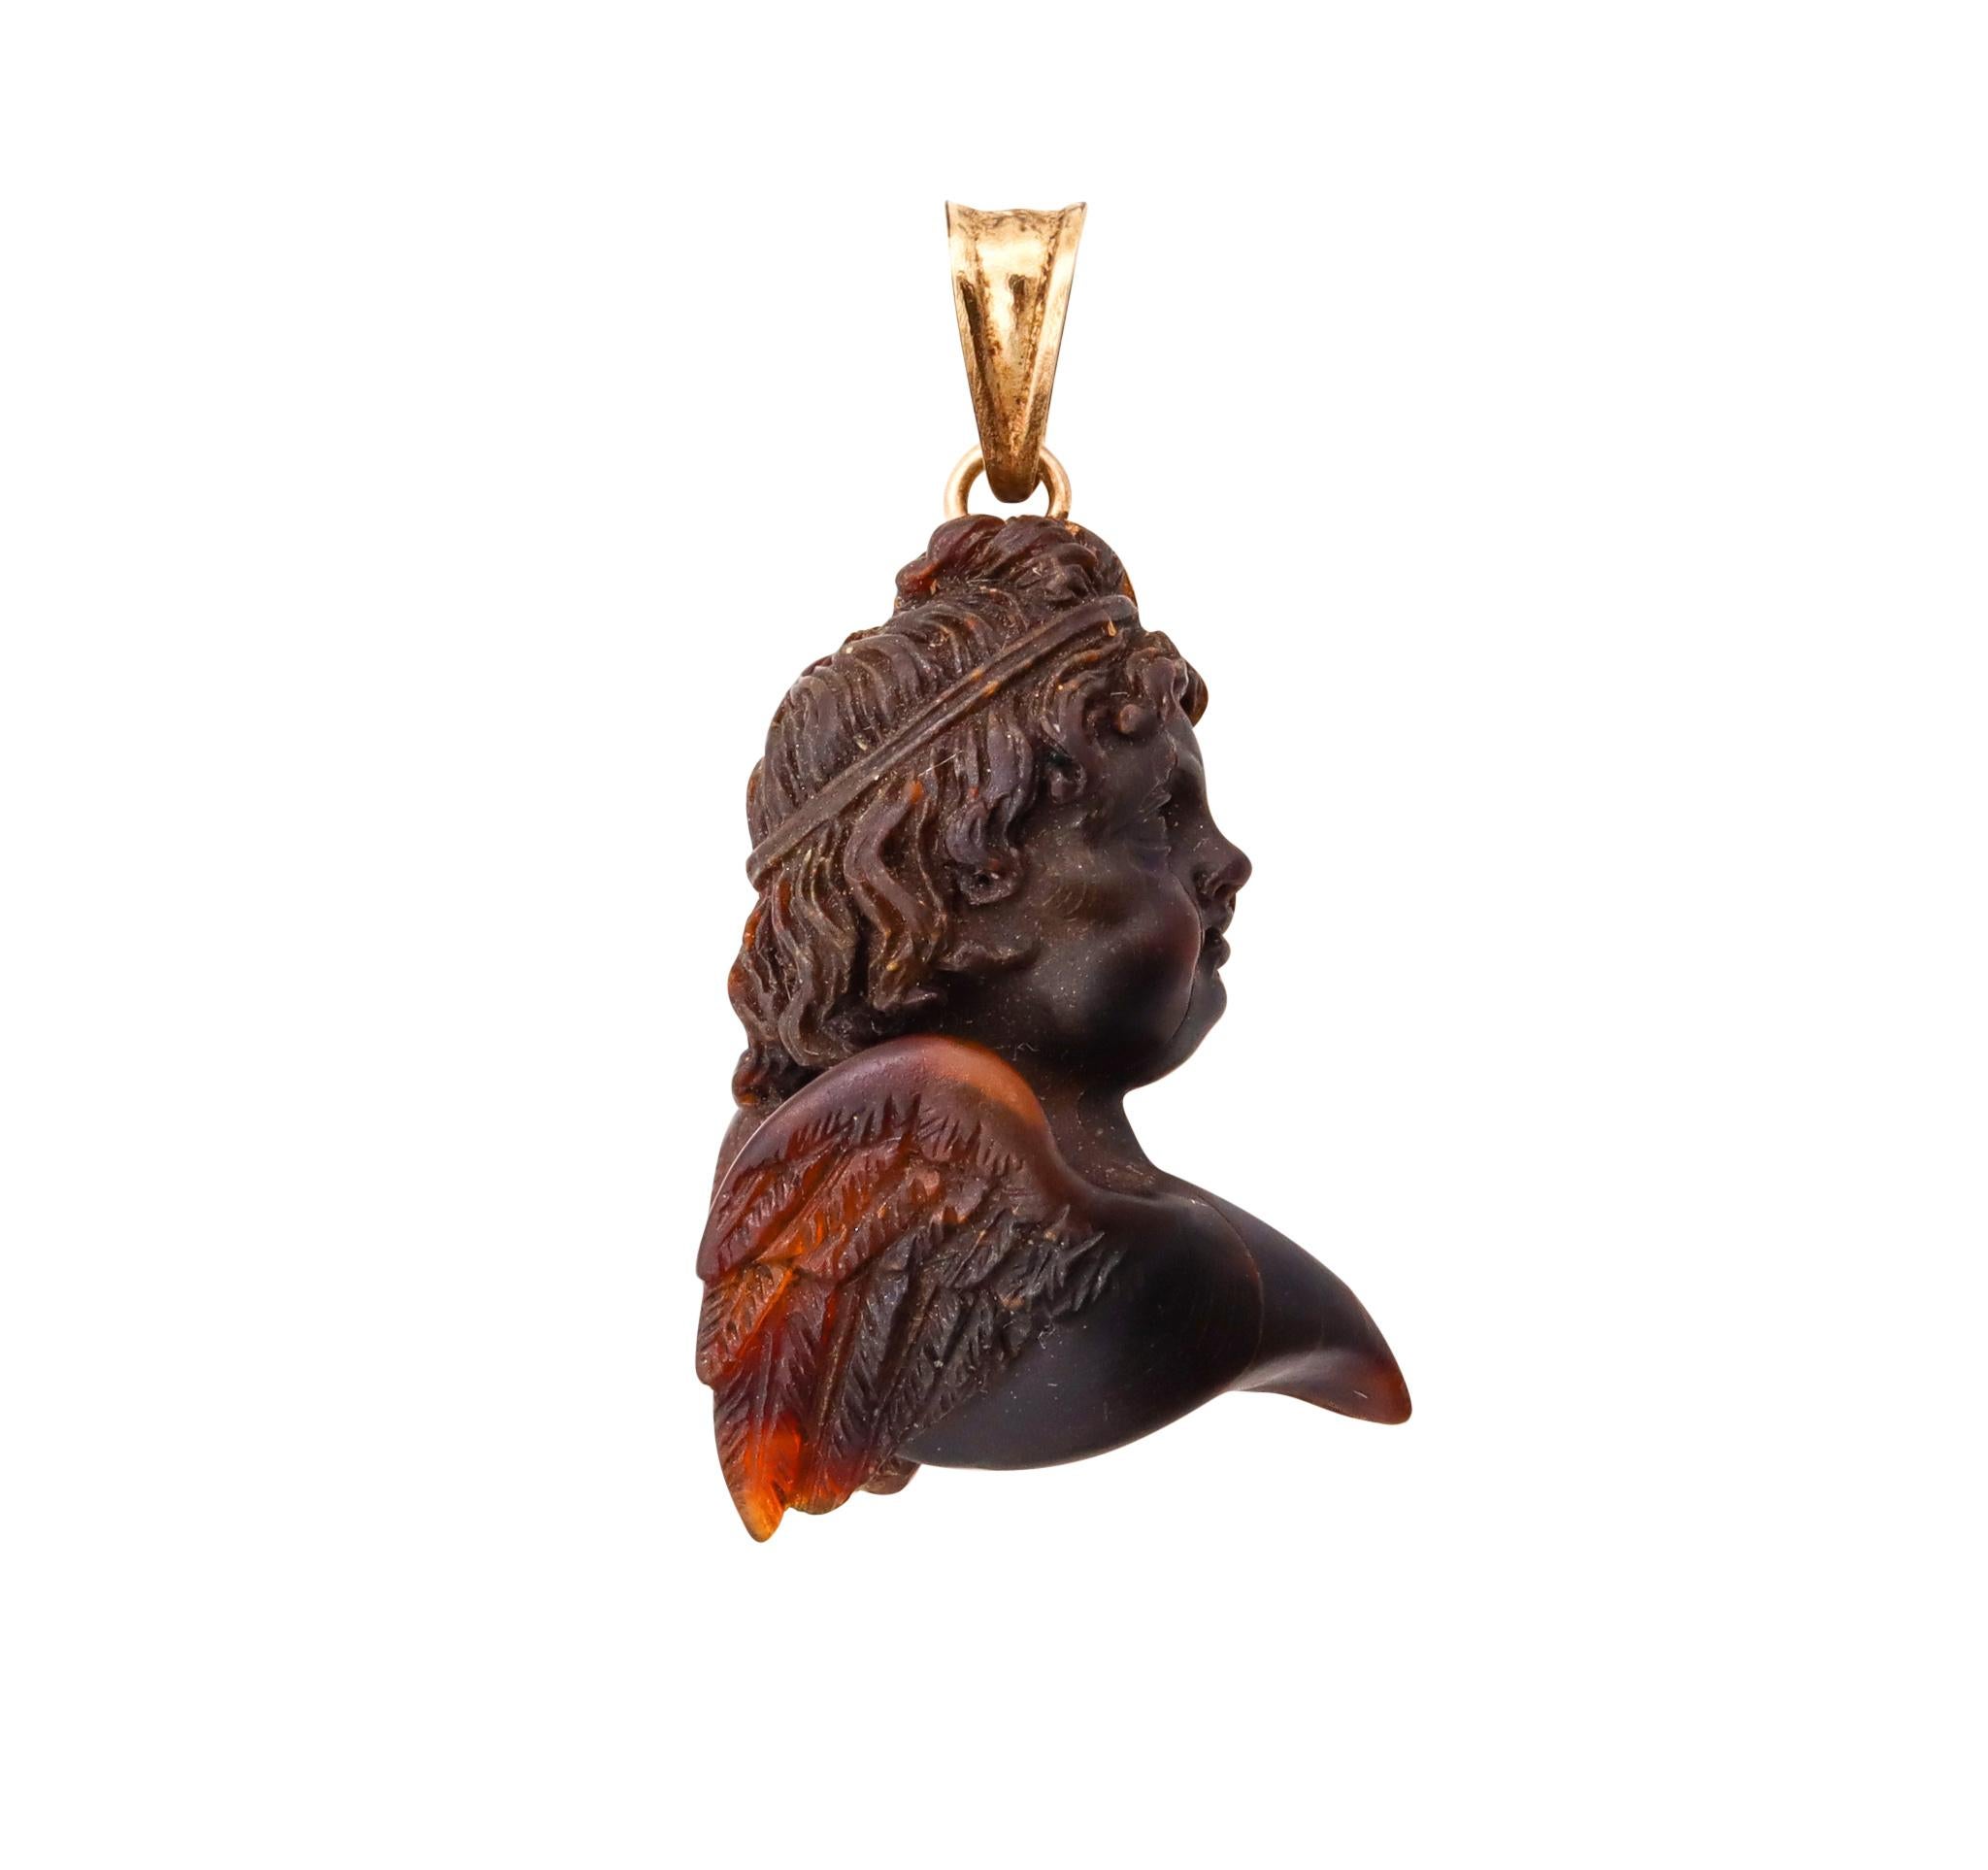 French 18th century carved pendant.

Very rare piece, created in France during the middle Georgian period (1714-1837) circa 1790. The gorgeous carved piece, depicts the profile of a winged cherub facing to the right, with little wings. It was